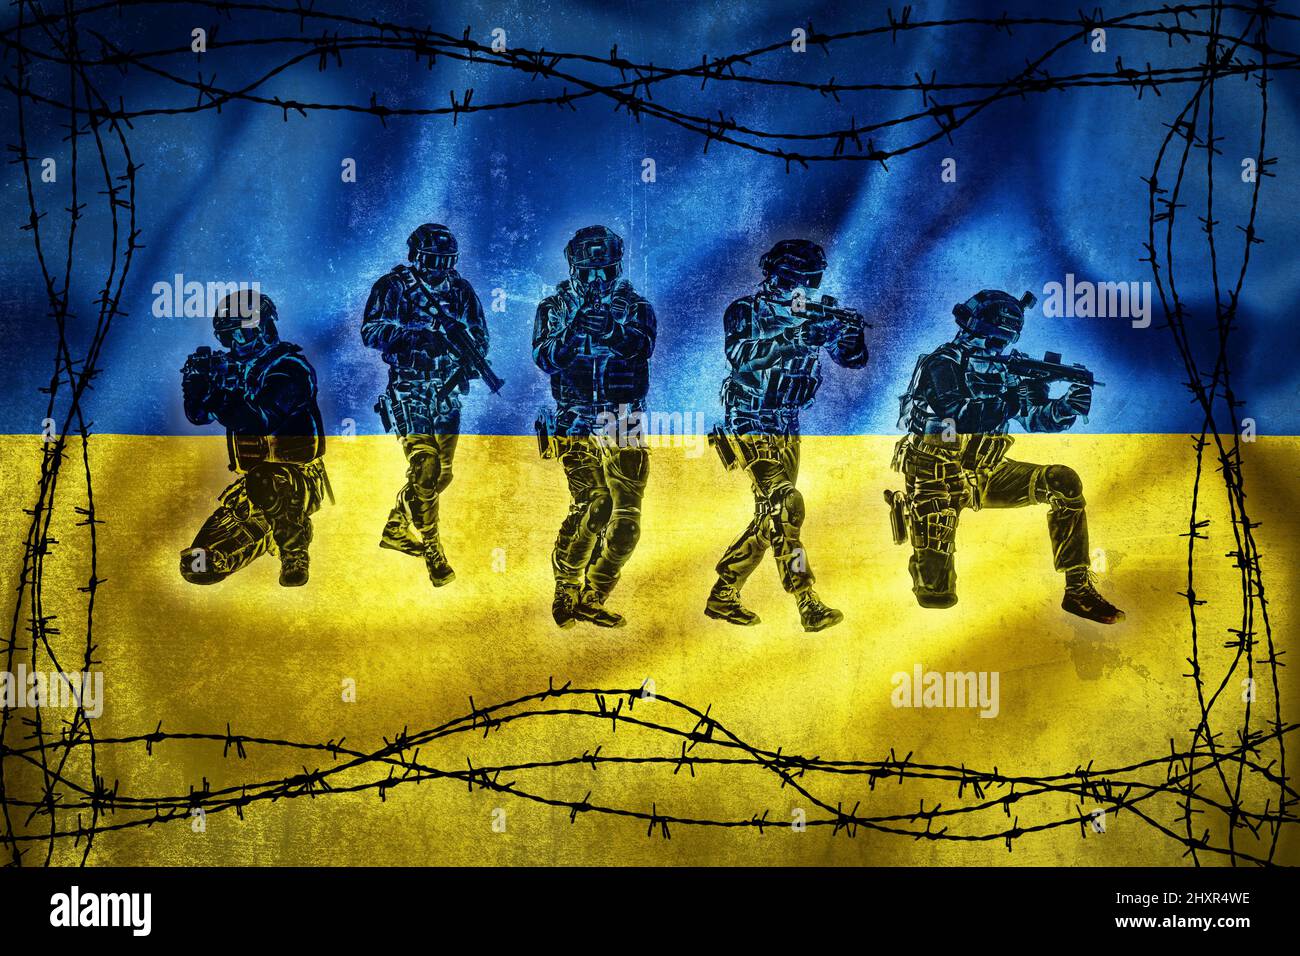 Grunge flag of Ukraine surrounded by barb wire with soliders pointing weapon illustration, concept of tense relations between west and Russia Stock Photo